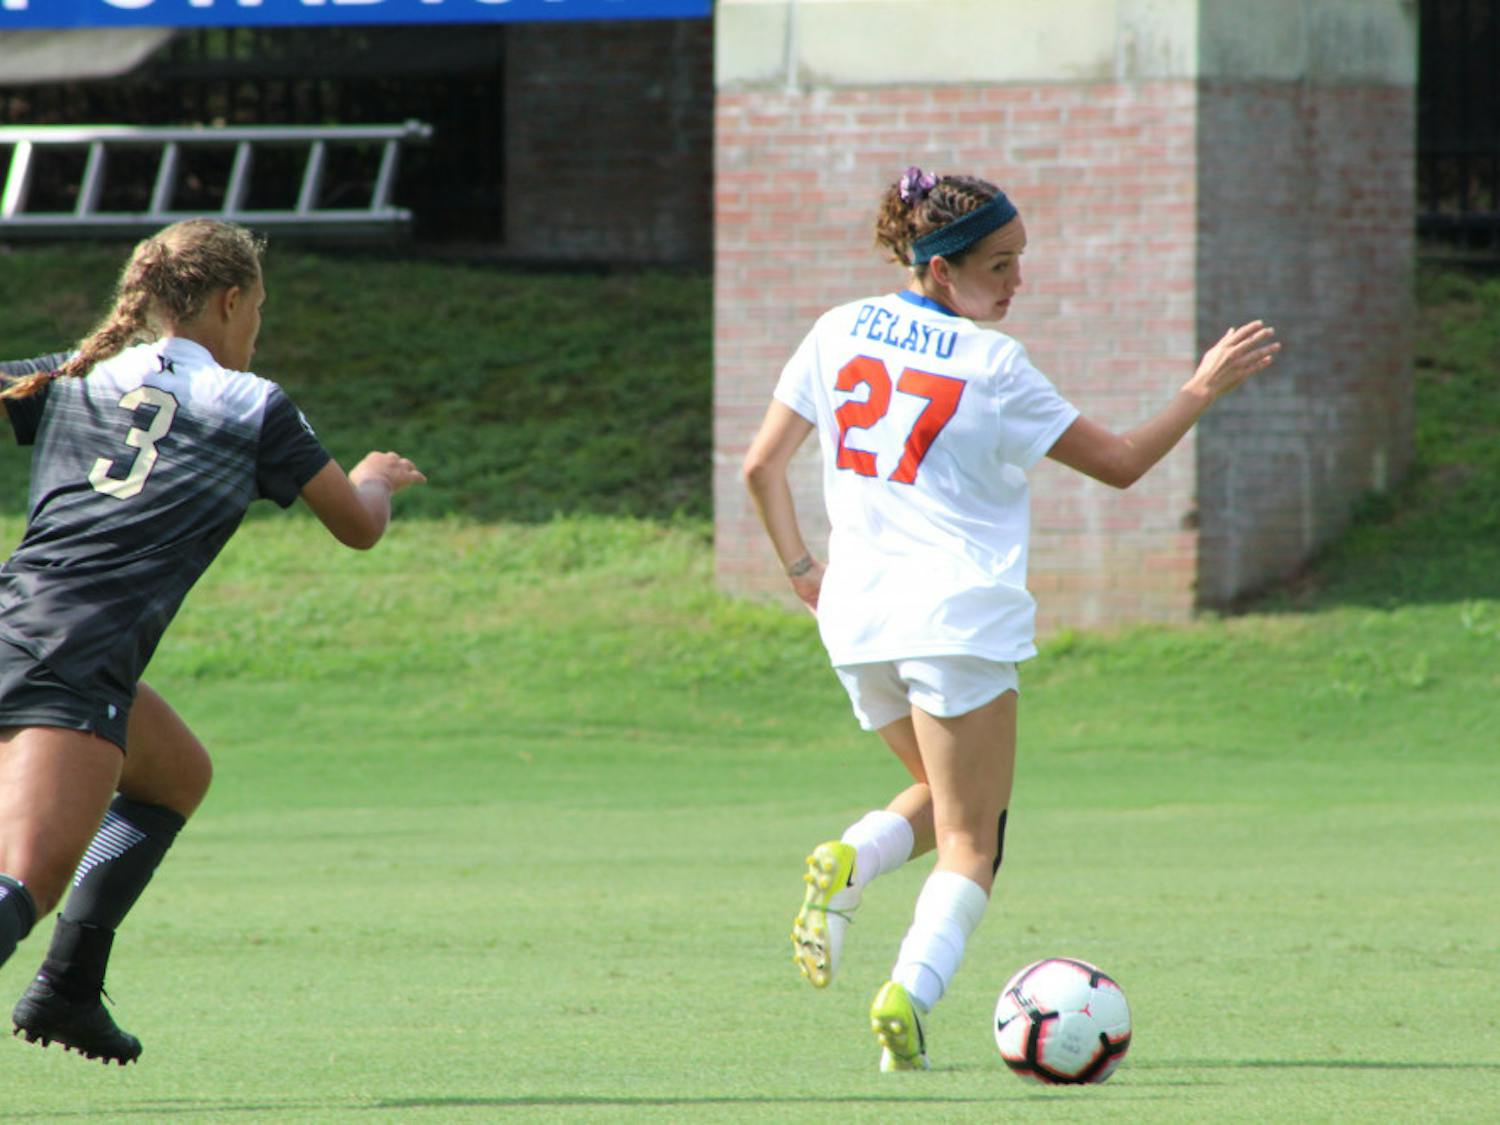 Senior midfielder Mayra Pelayo hit the crossbar in the 16th minute of UF's 0-0 tie at Mississippi State. “I think we need to be sharper in our execution, but other than that, I'm really proud of the team," she said in a release. 